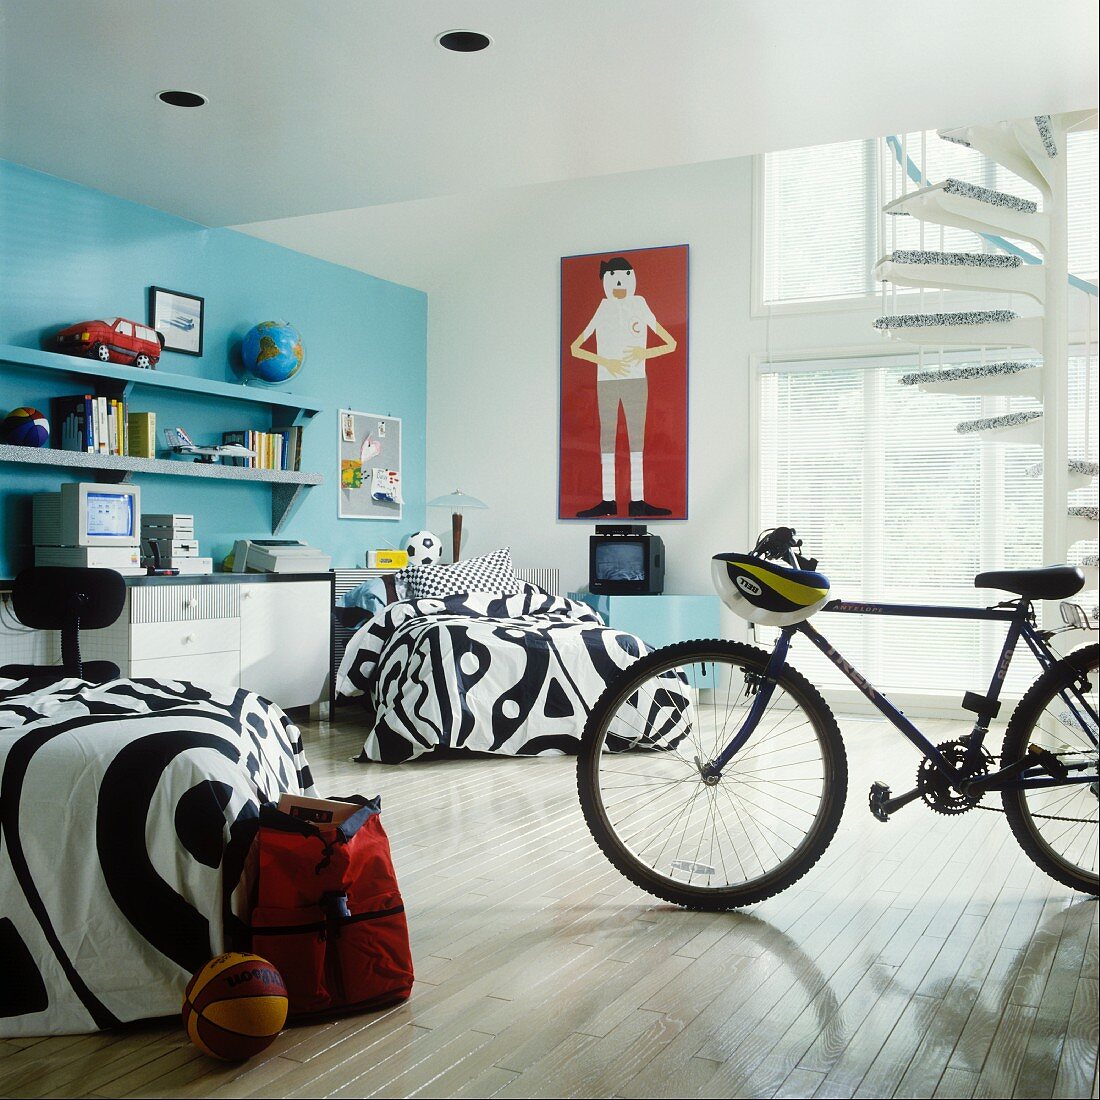 Boys' room with blue wall, black and white bedspreads, desk and bike